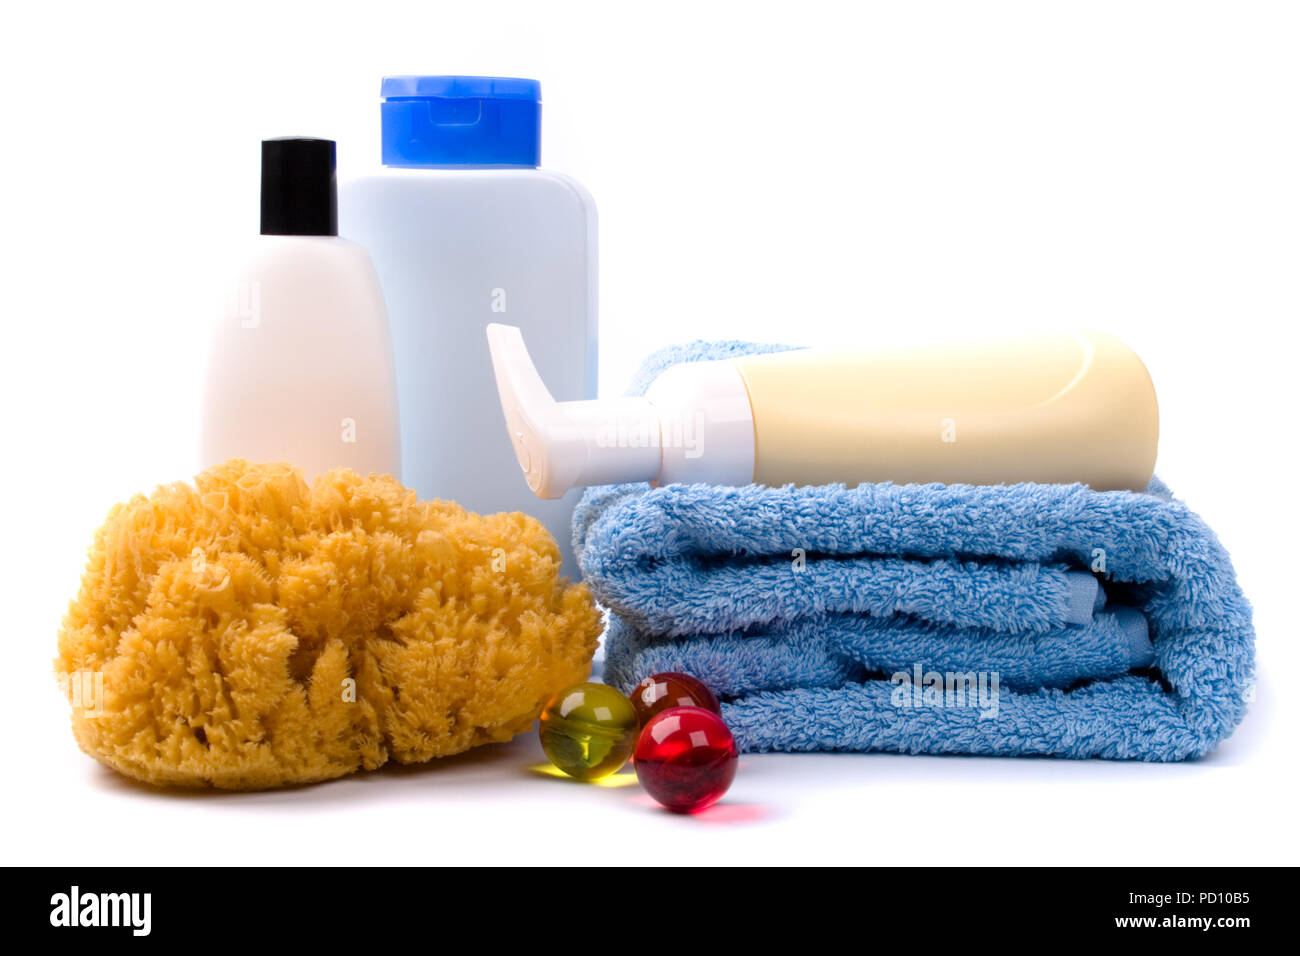 body care products and towel on white background PD10B5